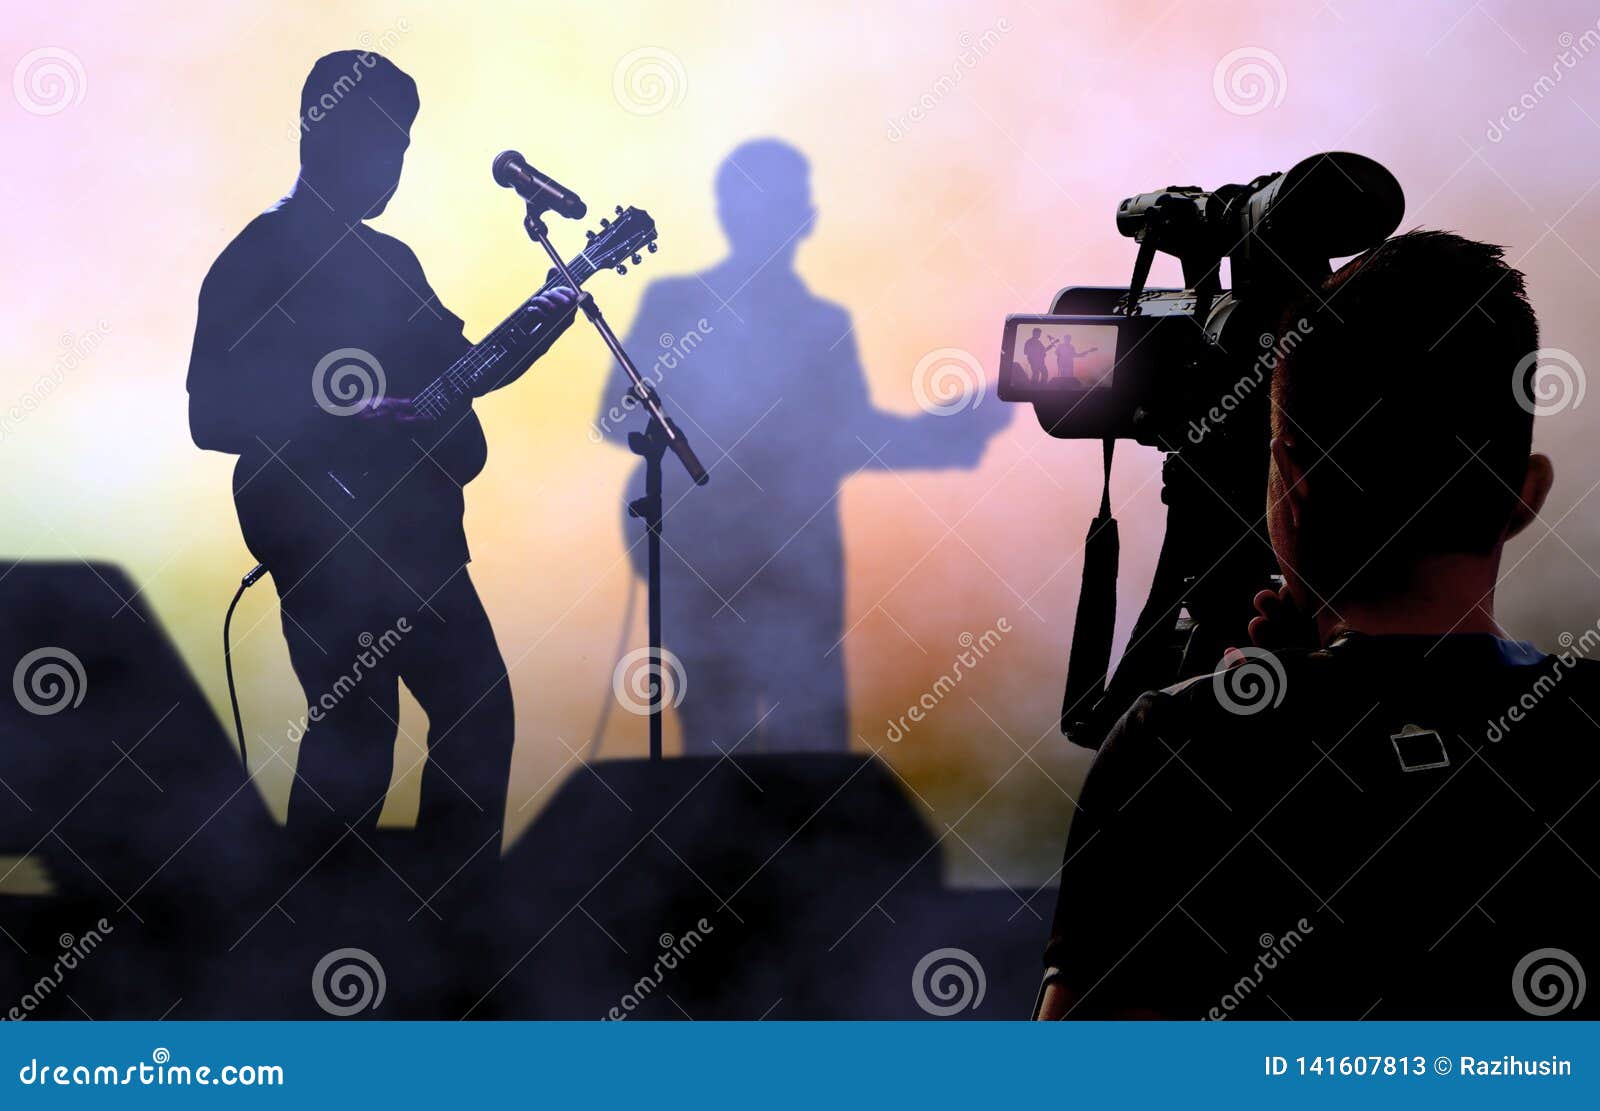 cameraman recording and broadcasting live on concerts using video camera